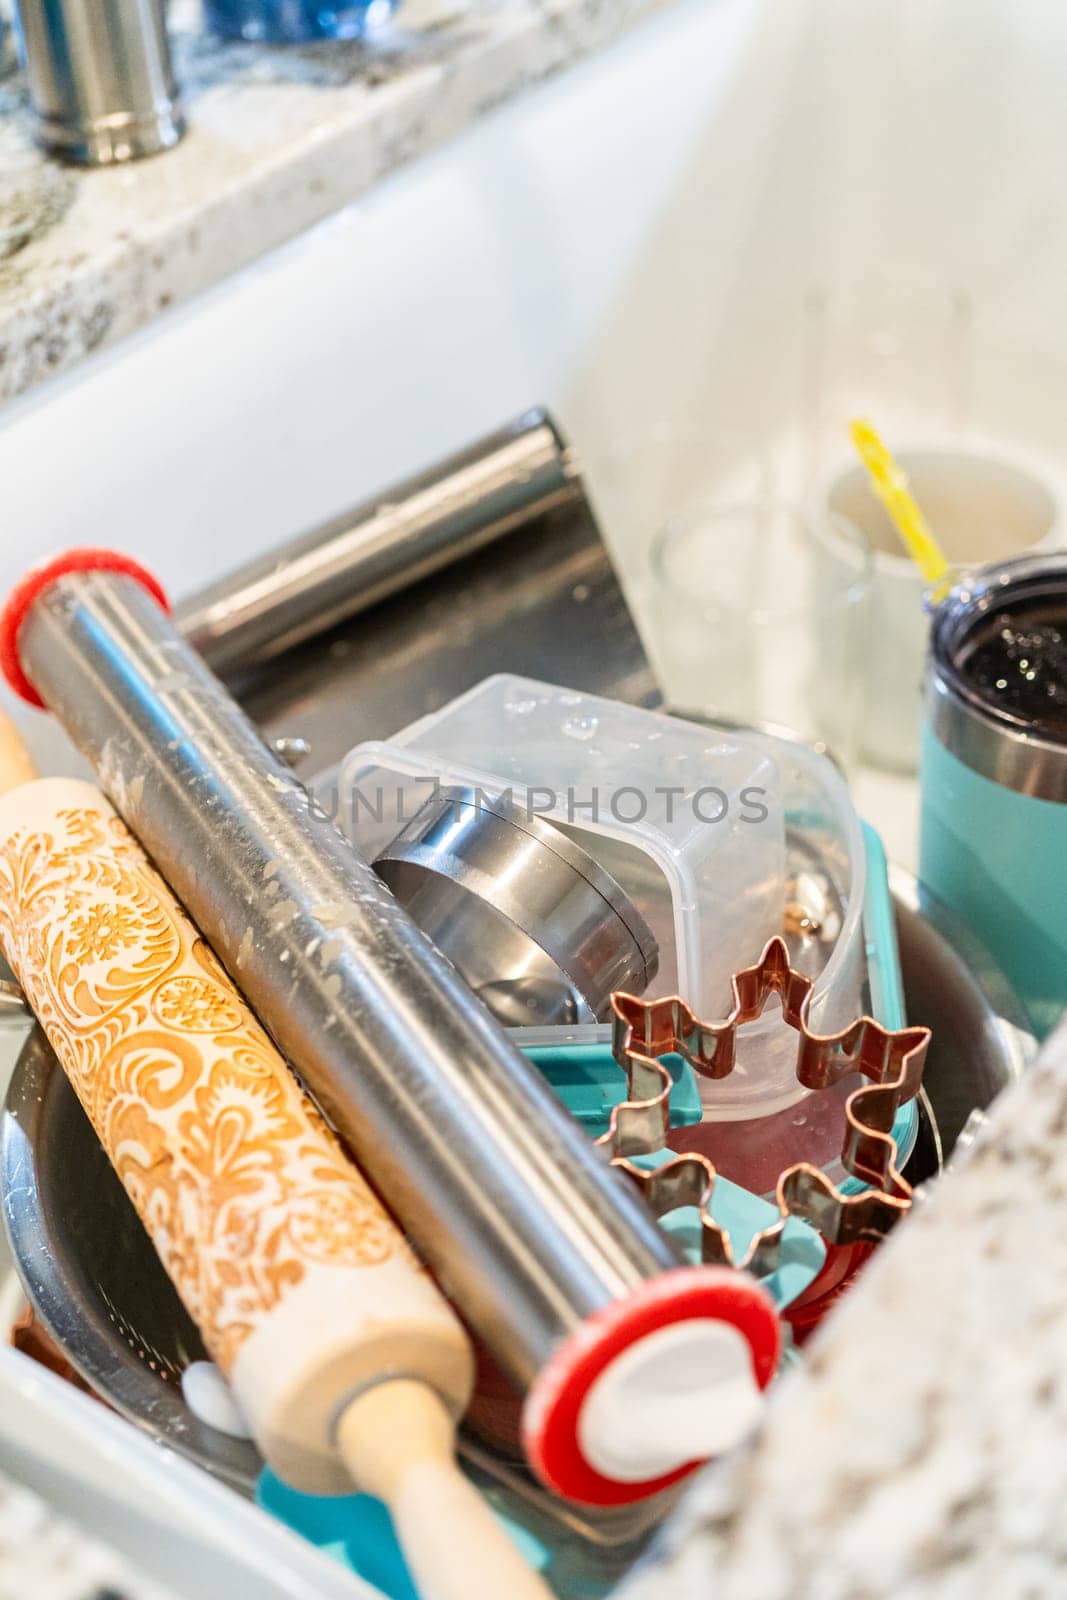 After a fun day of baking snowflake sugar cookies, the kitchen sink is filled with a pile of dirty dishes waiting to be cleaned.